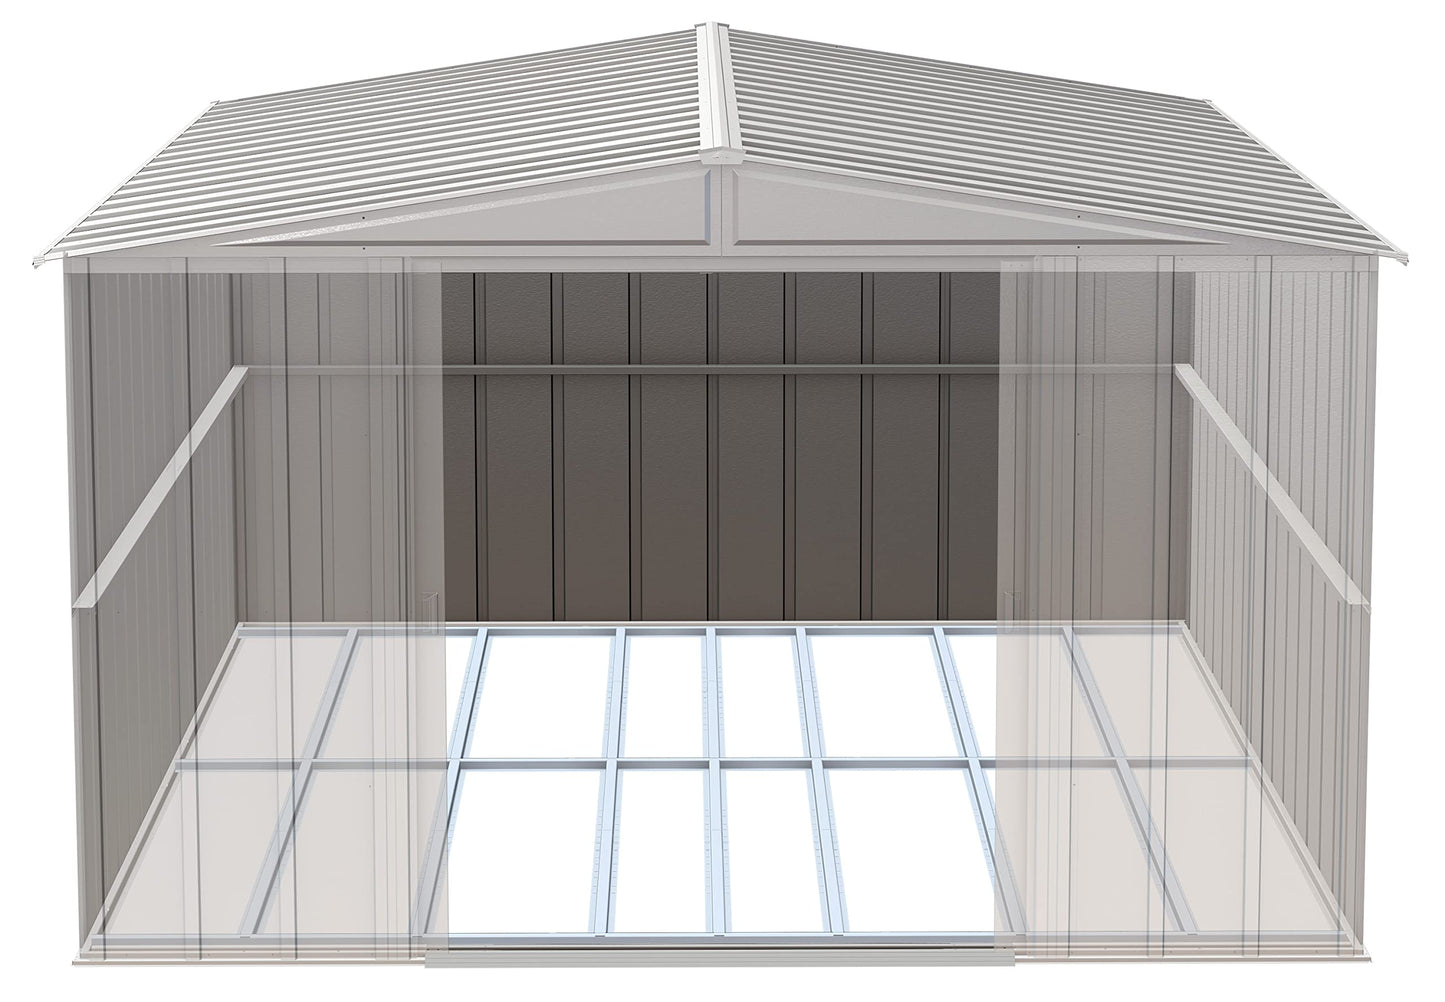 Arrow Shed Select 10' x 14' Outdoor Lockable Steel Storage Shed Building, Charcoal & Floor Frame Kit for Arrow Classic and Select Storage Sheds, Extra Large Sheds Shed Building + Frame Kit